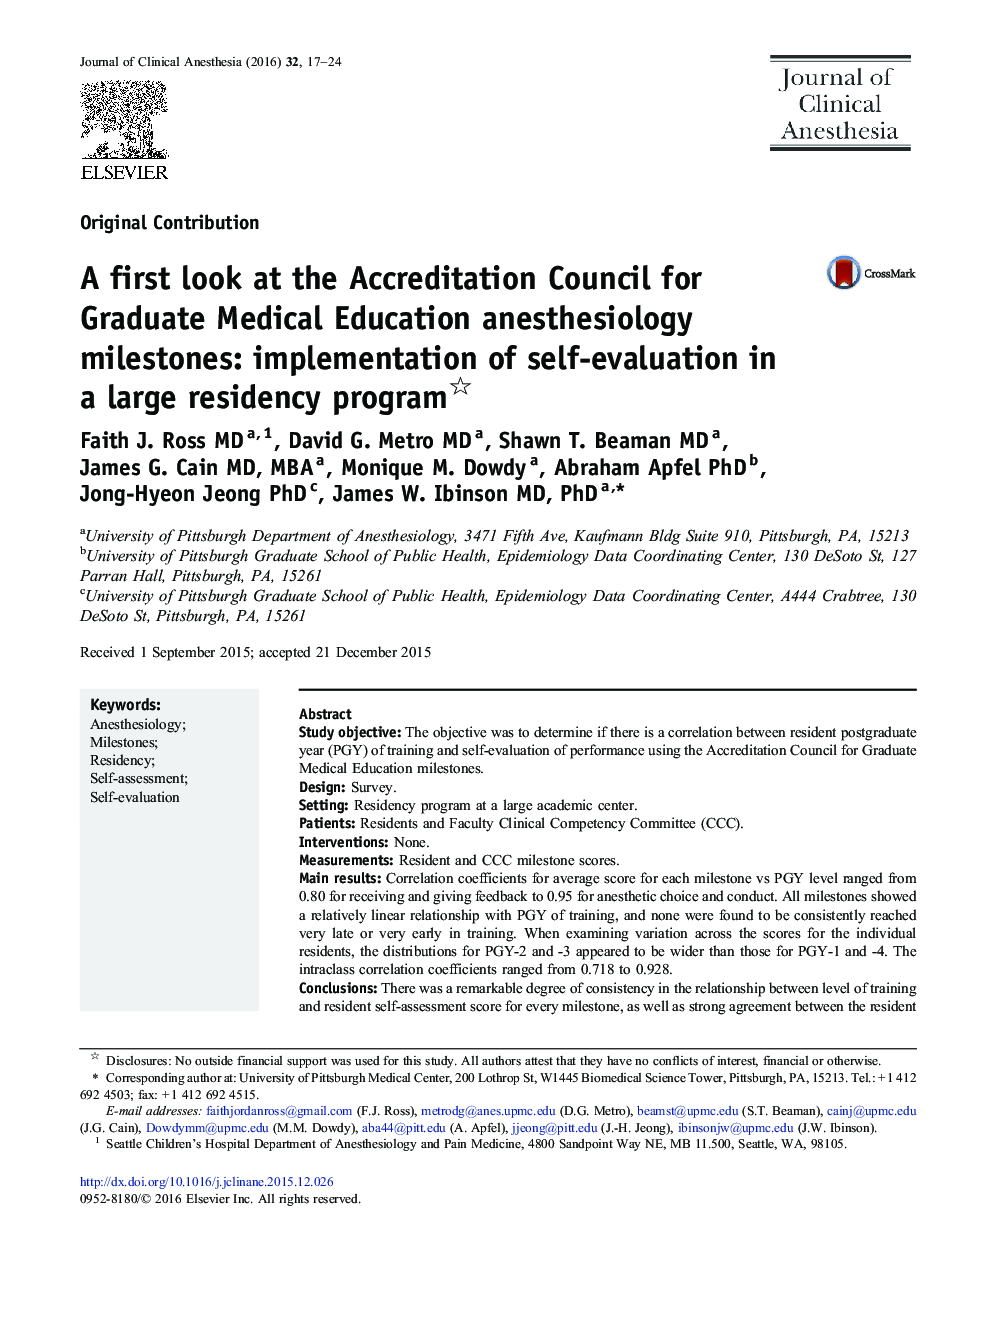 Original ContributionA first look at the Accreditation Council for Graduate Medical Education anesthesiology milestones: implementation of self-evaluation in a large residency program